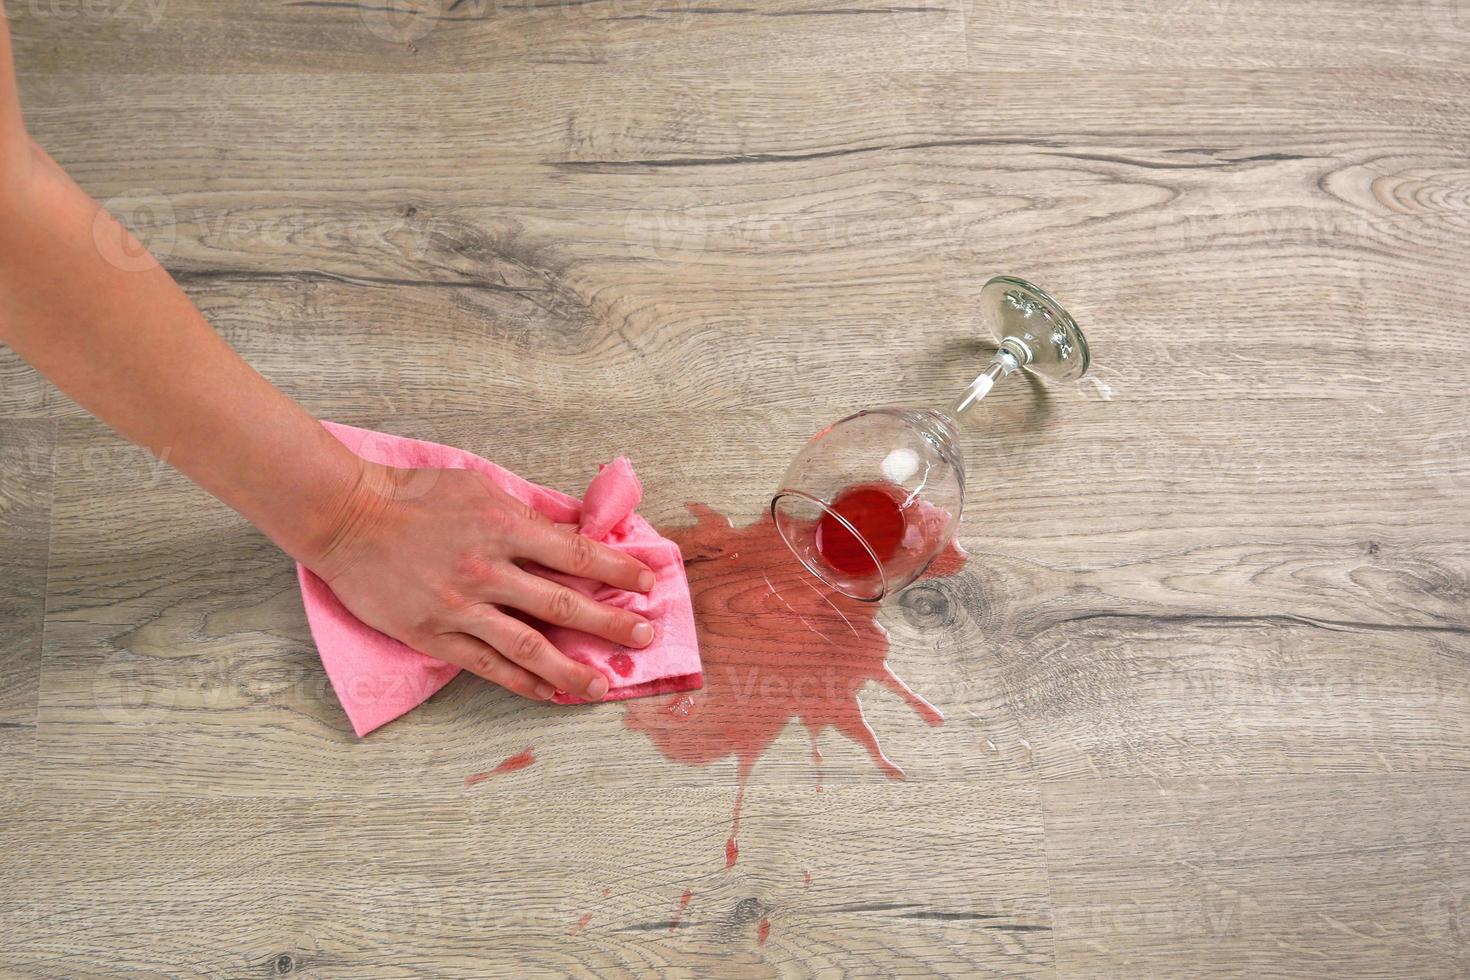 Glass of red wine fell on laminate, wine spilled on floor. A woman wipes the laminate from moisture. photo